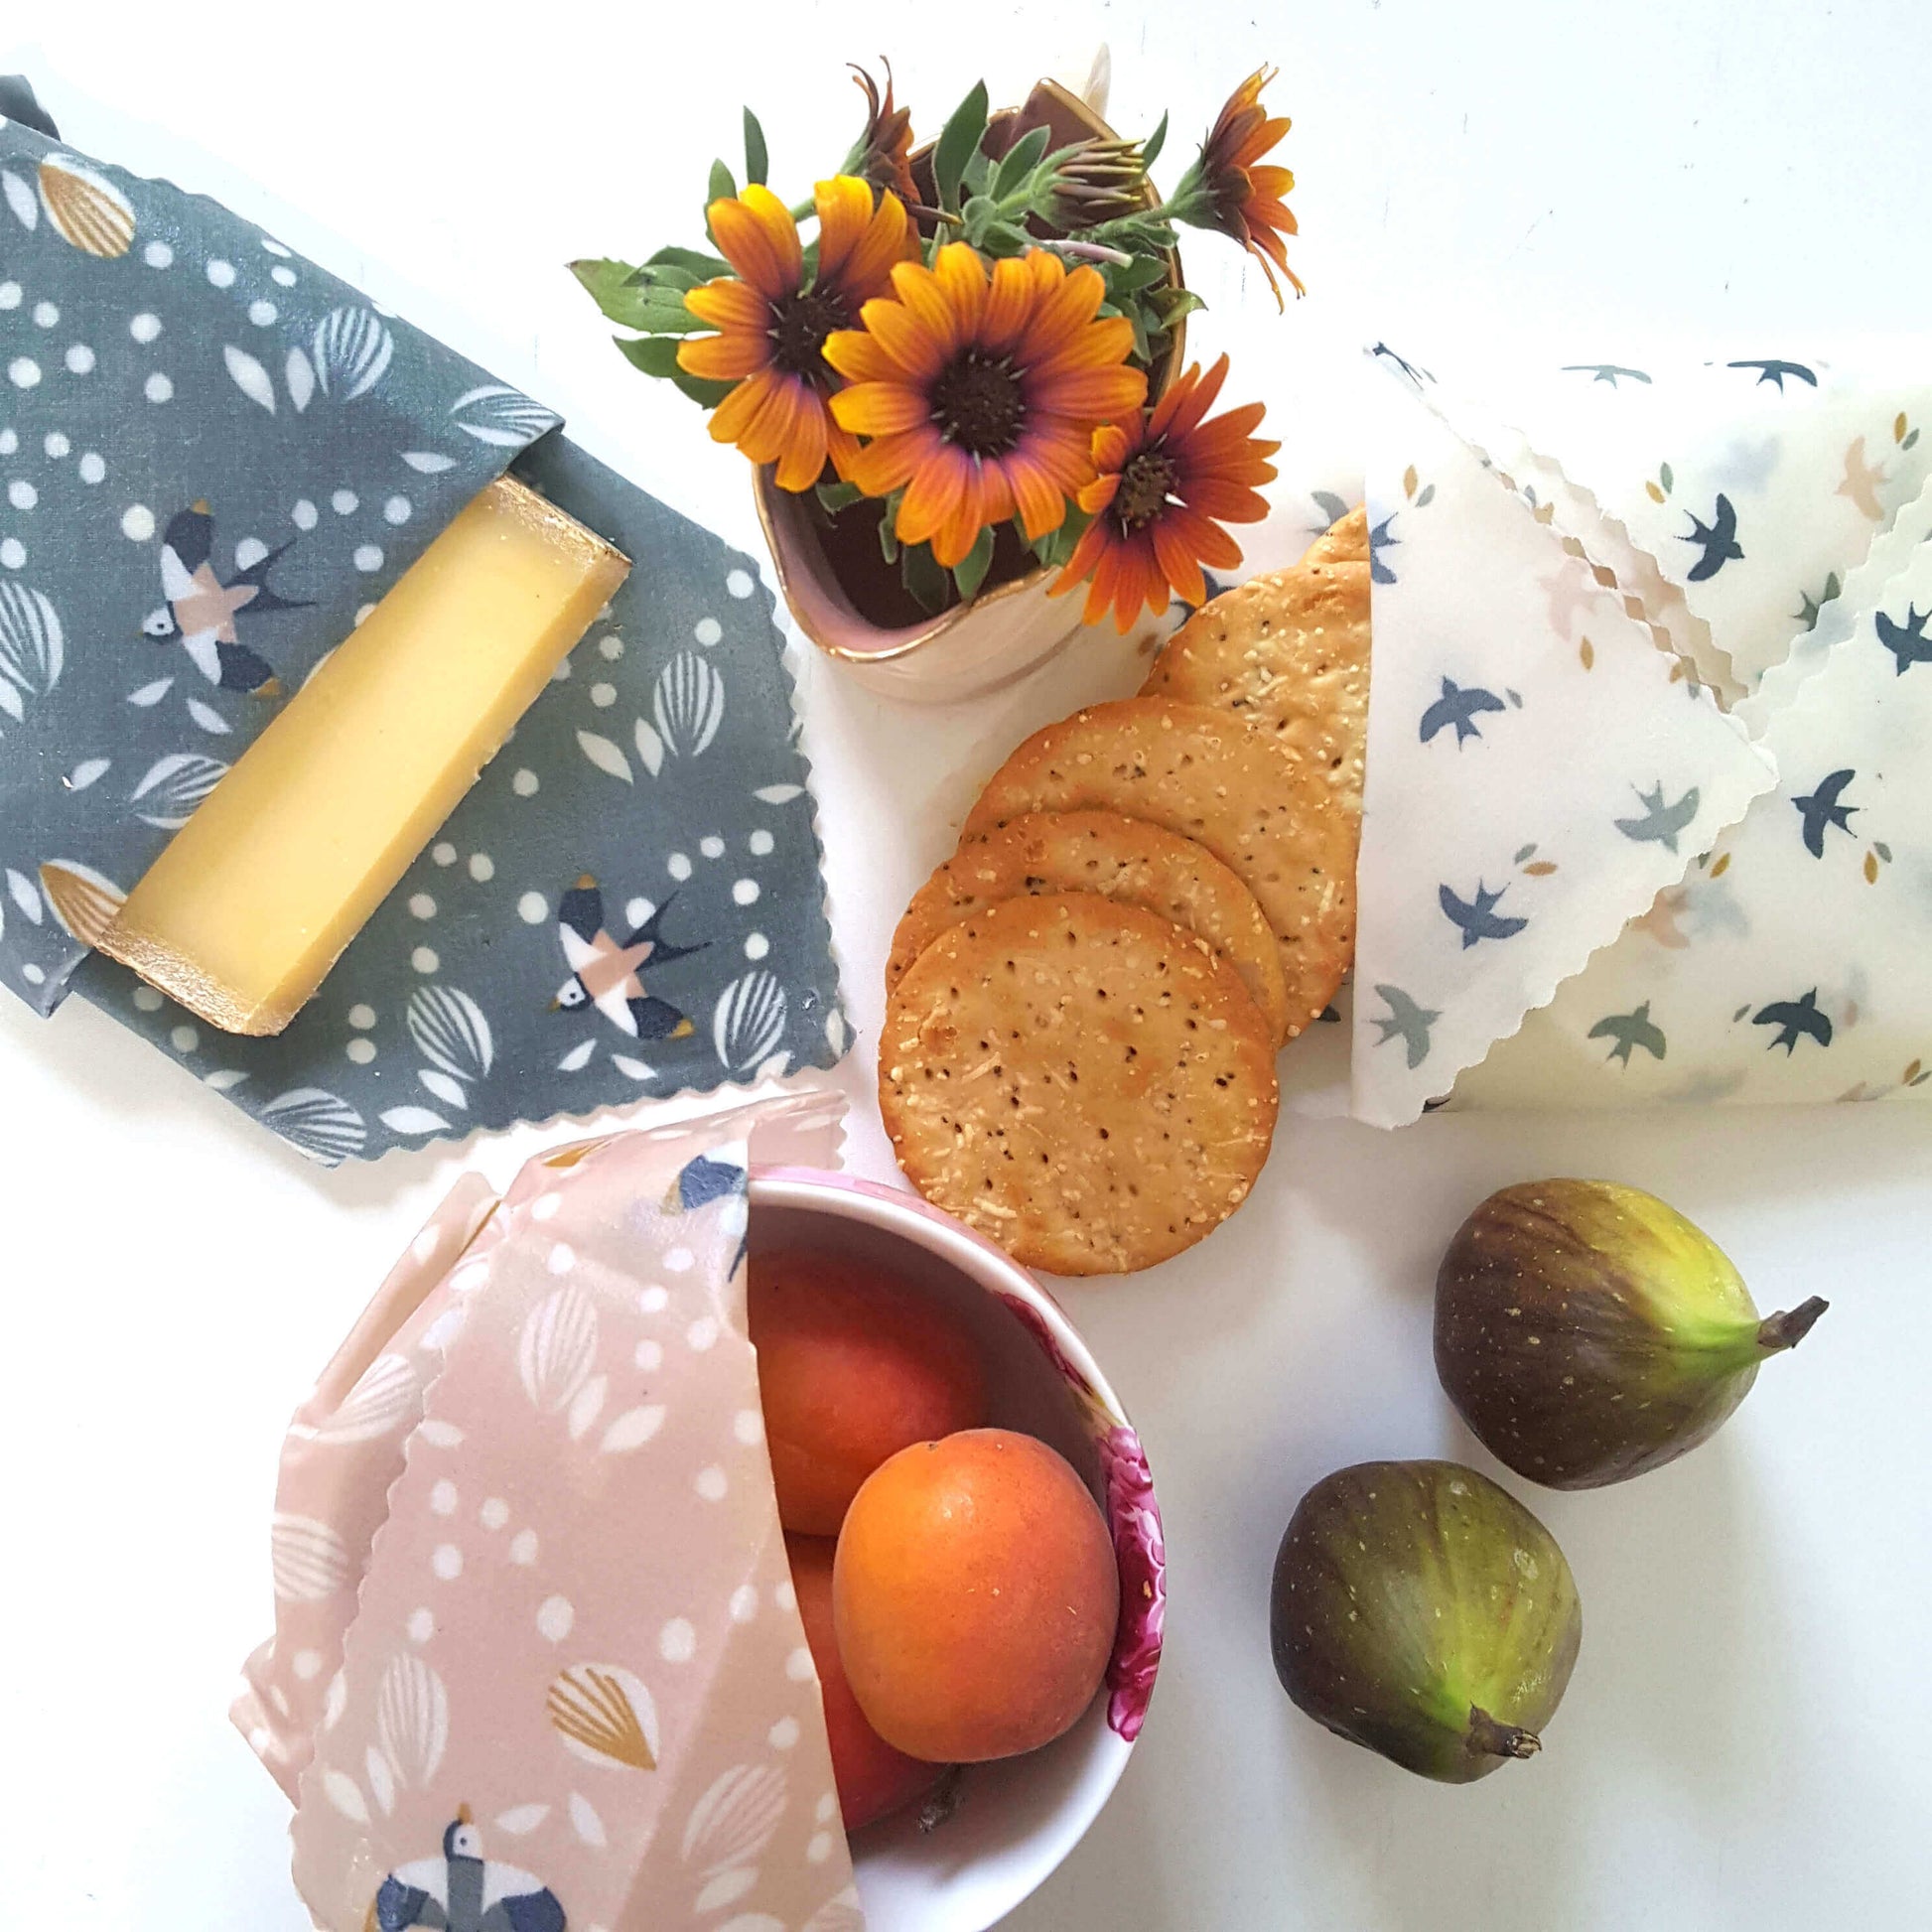 Reusable Beeswax Food Wraps 100% Hand Made in the UK by Honey Bee Good shown in Set of 3 Heritage Swifts pattern flatlay